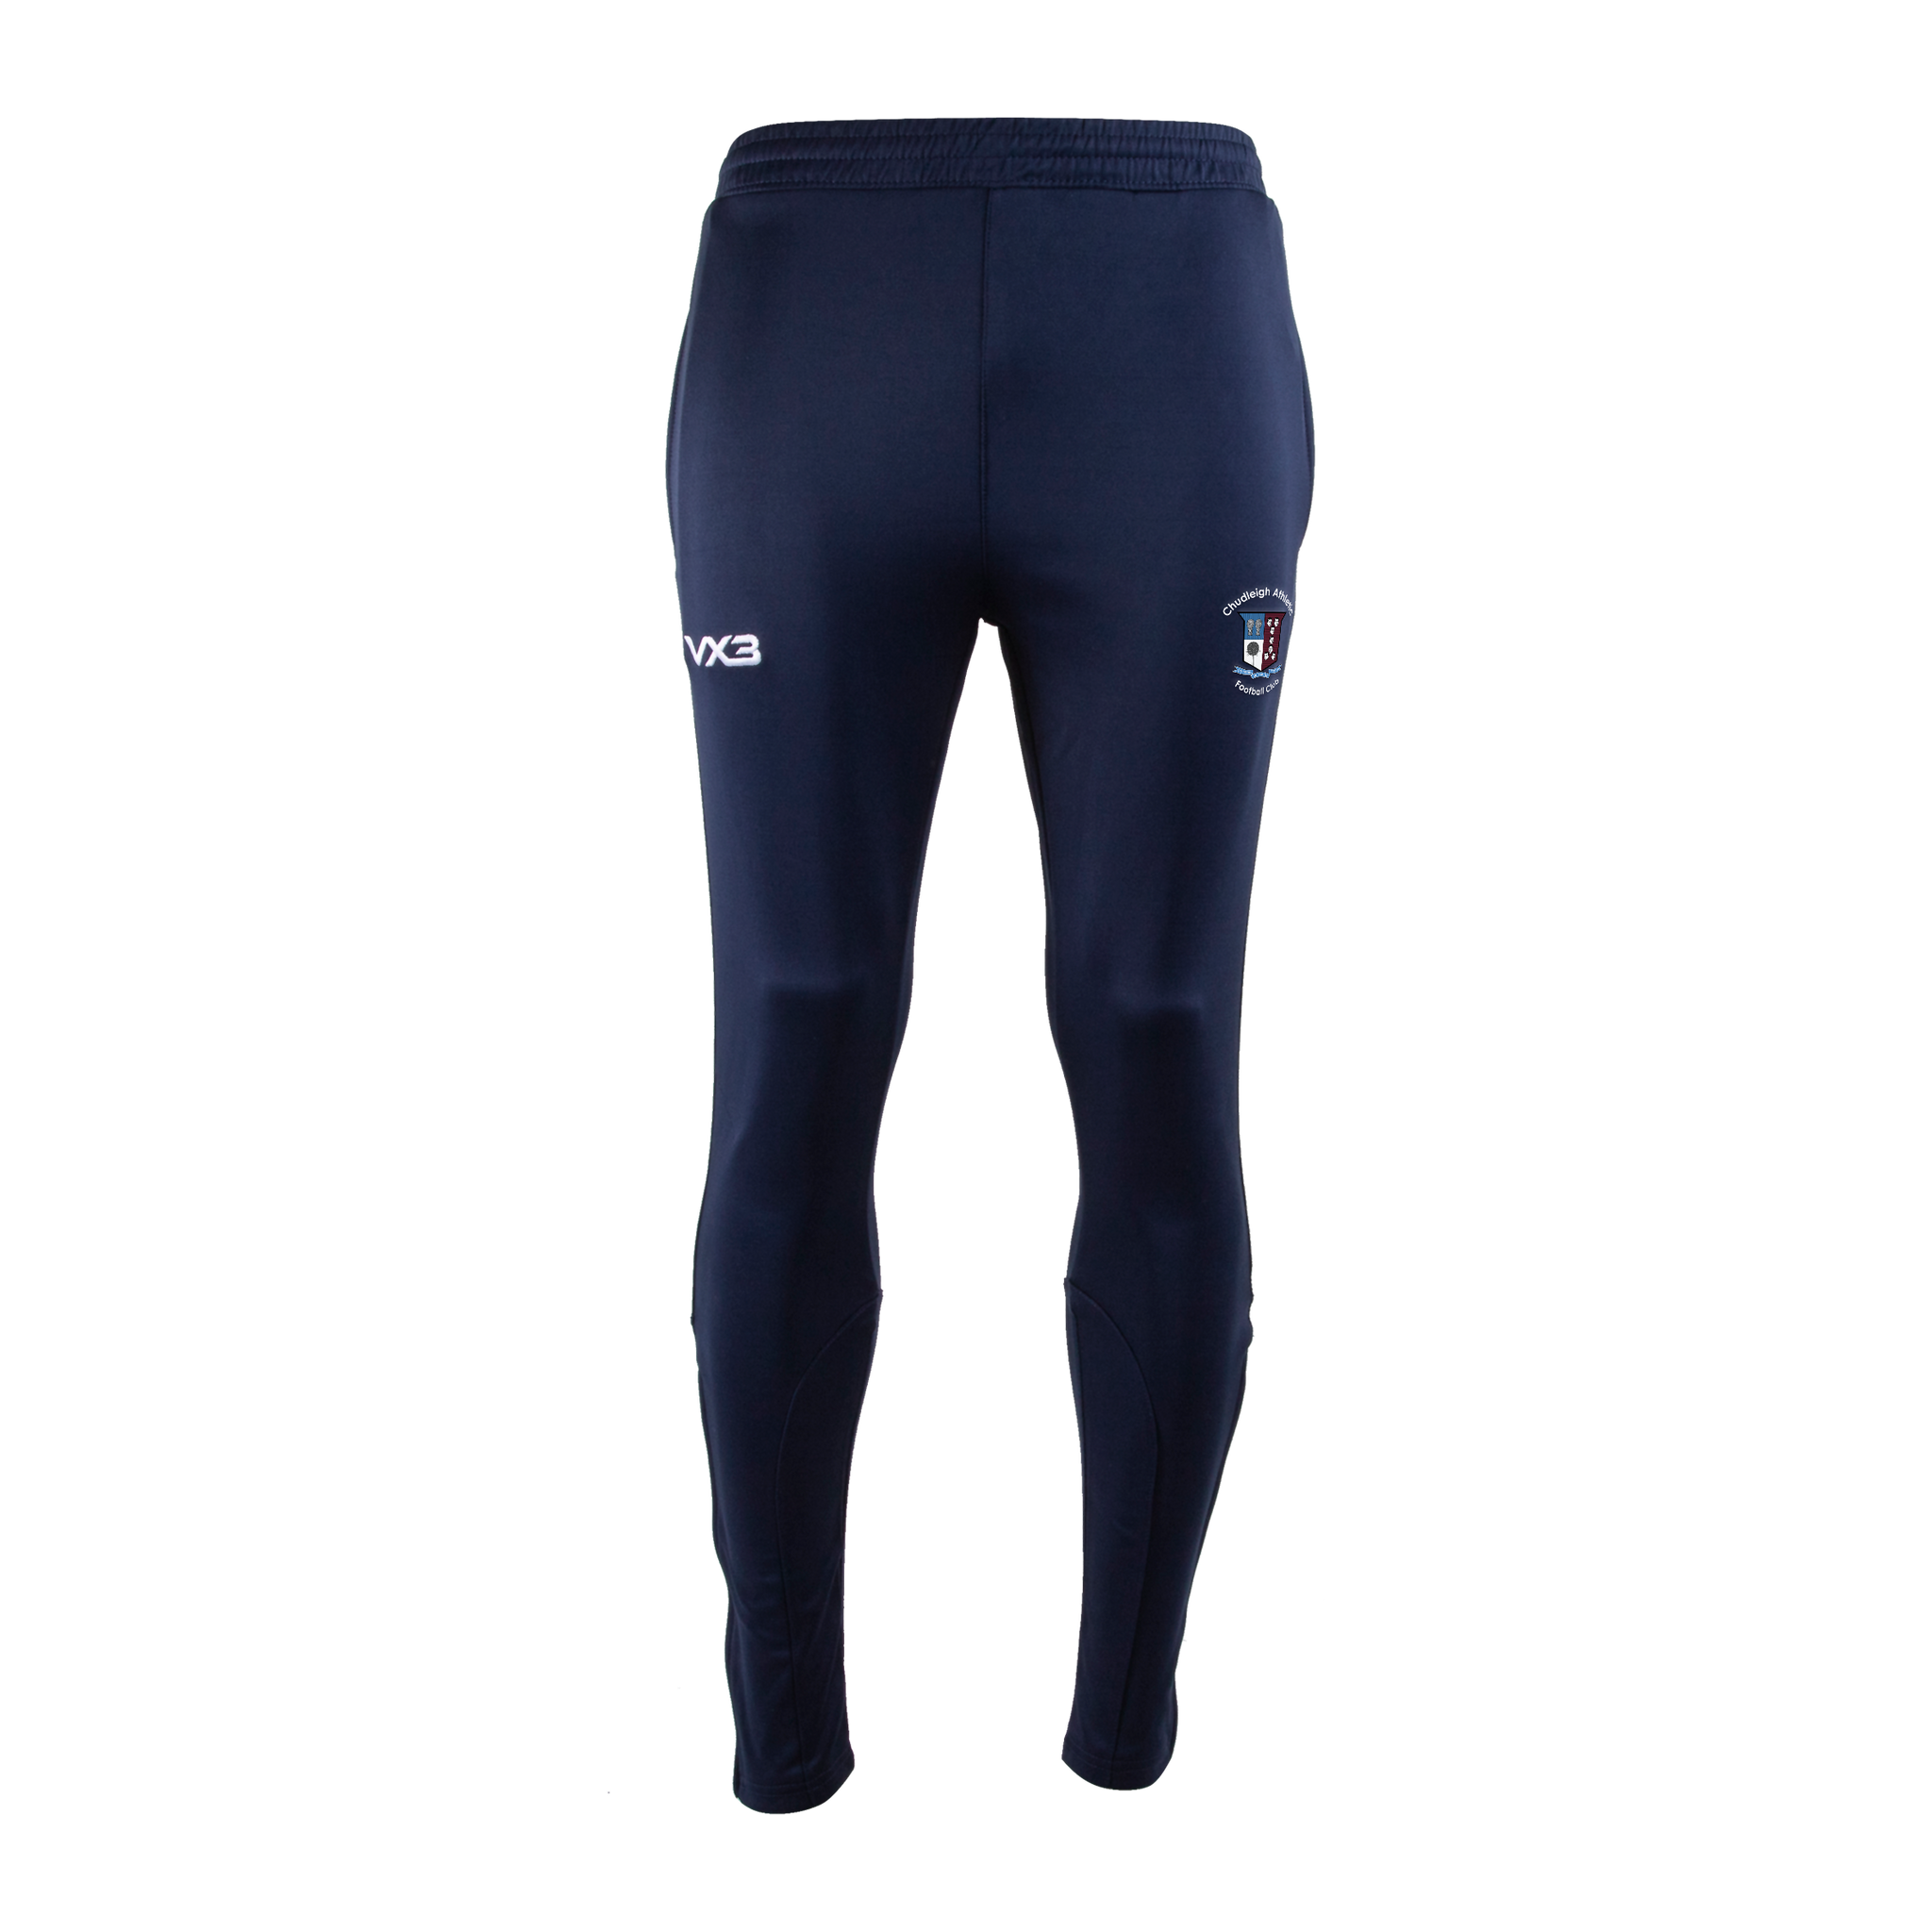 Chudleigh Athletic Football Club Primus Youth Skinny Pants